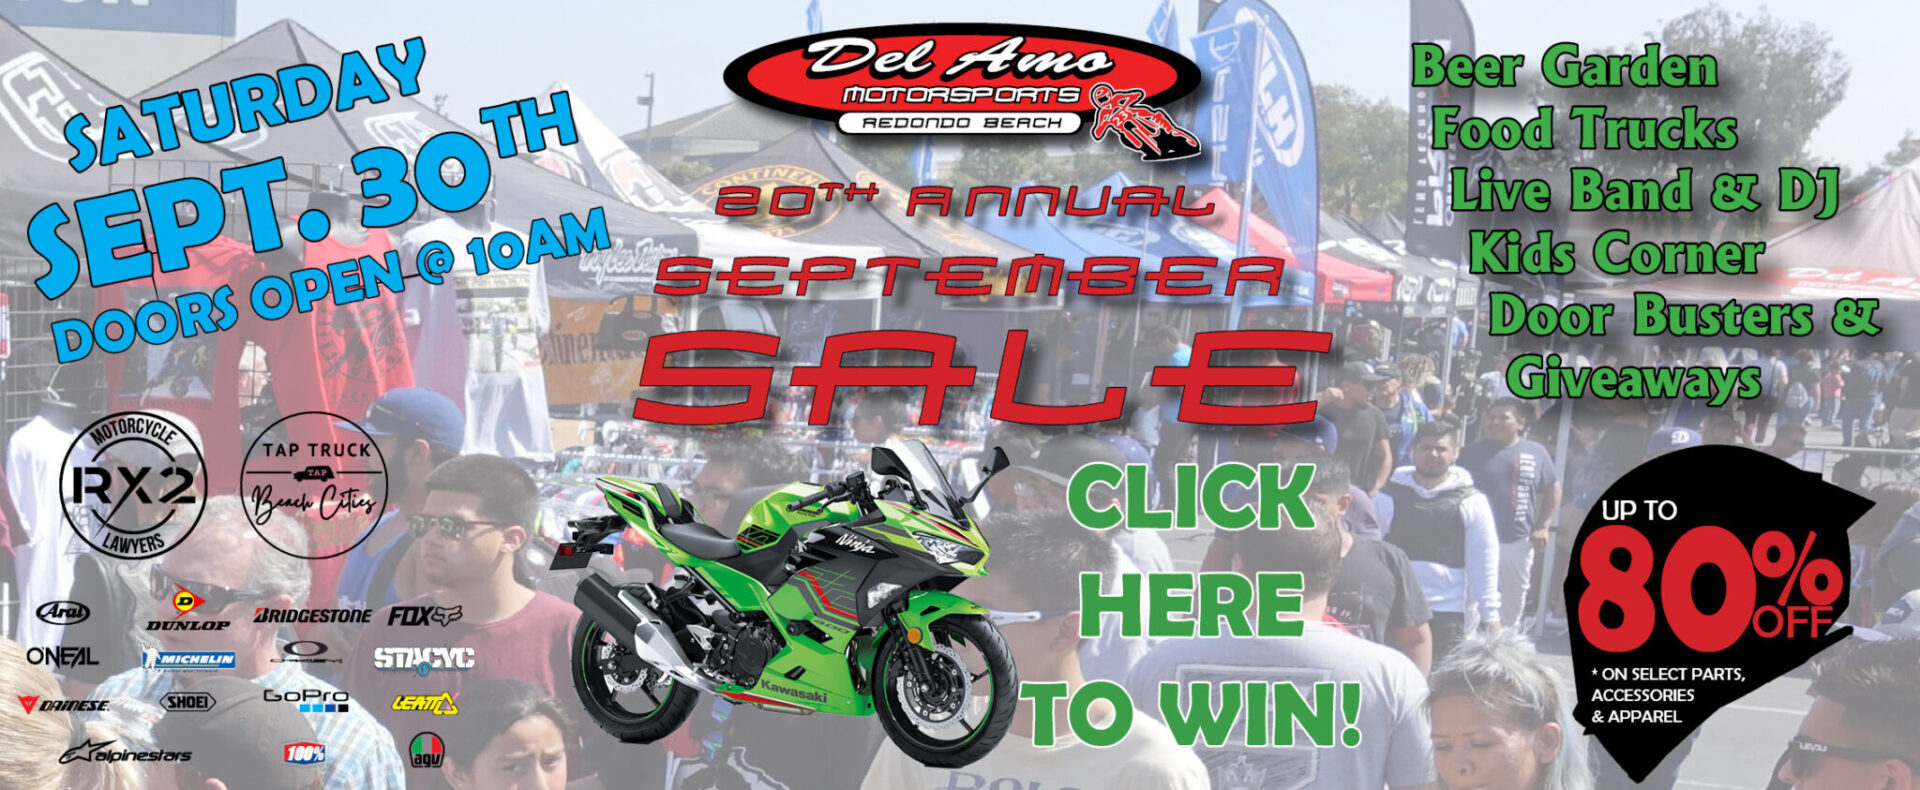 20th Annual September Sale